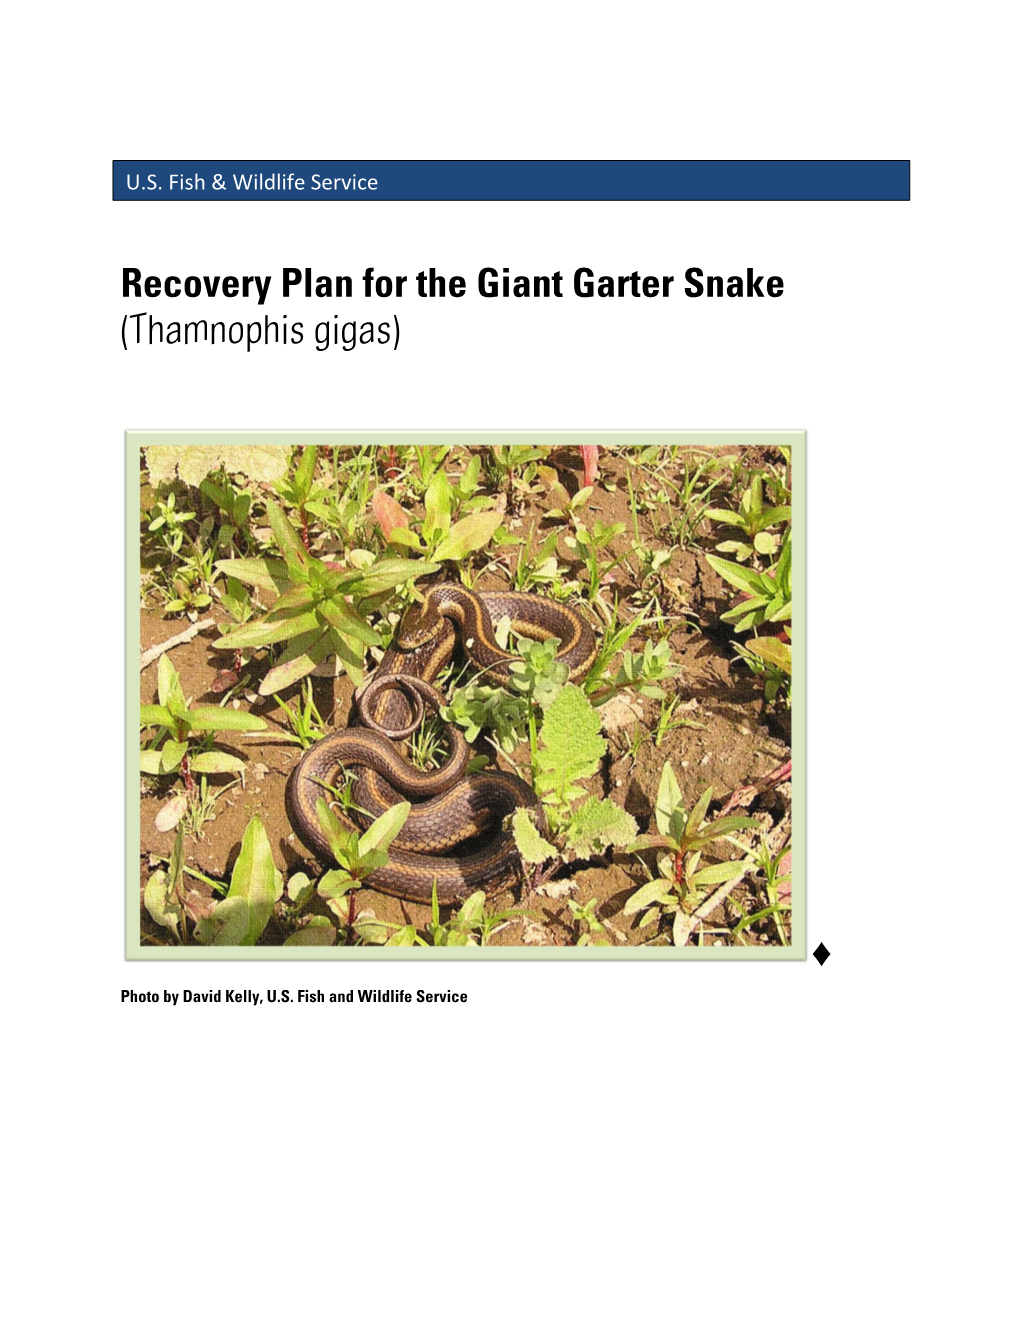 Recovery Plan for the Giant Garter Snake (Thamnophis Gigas)